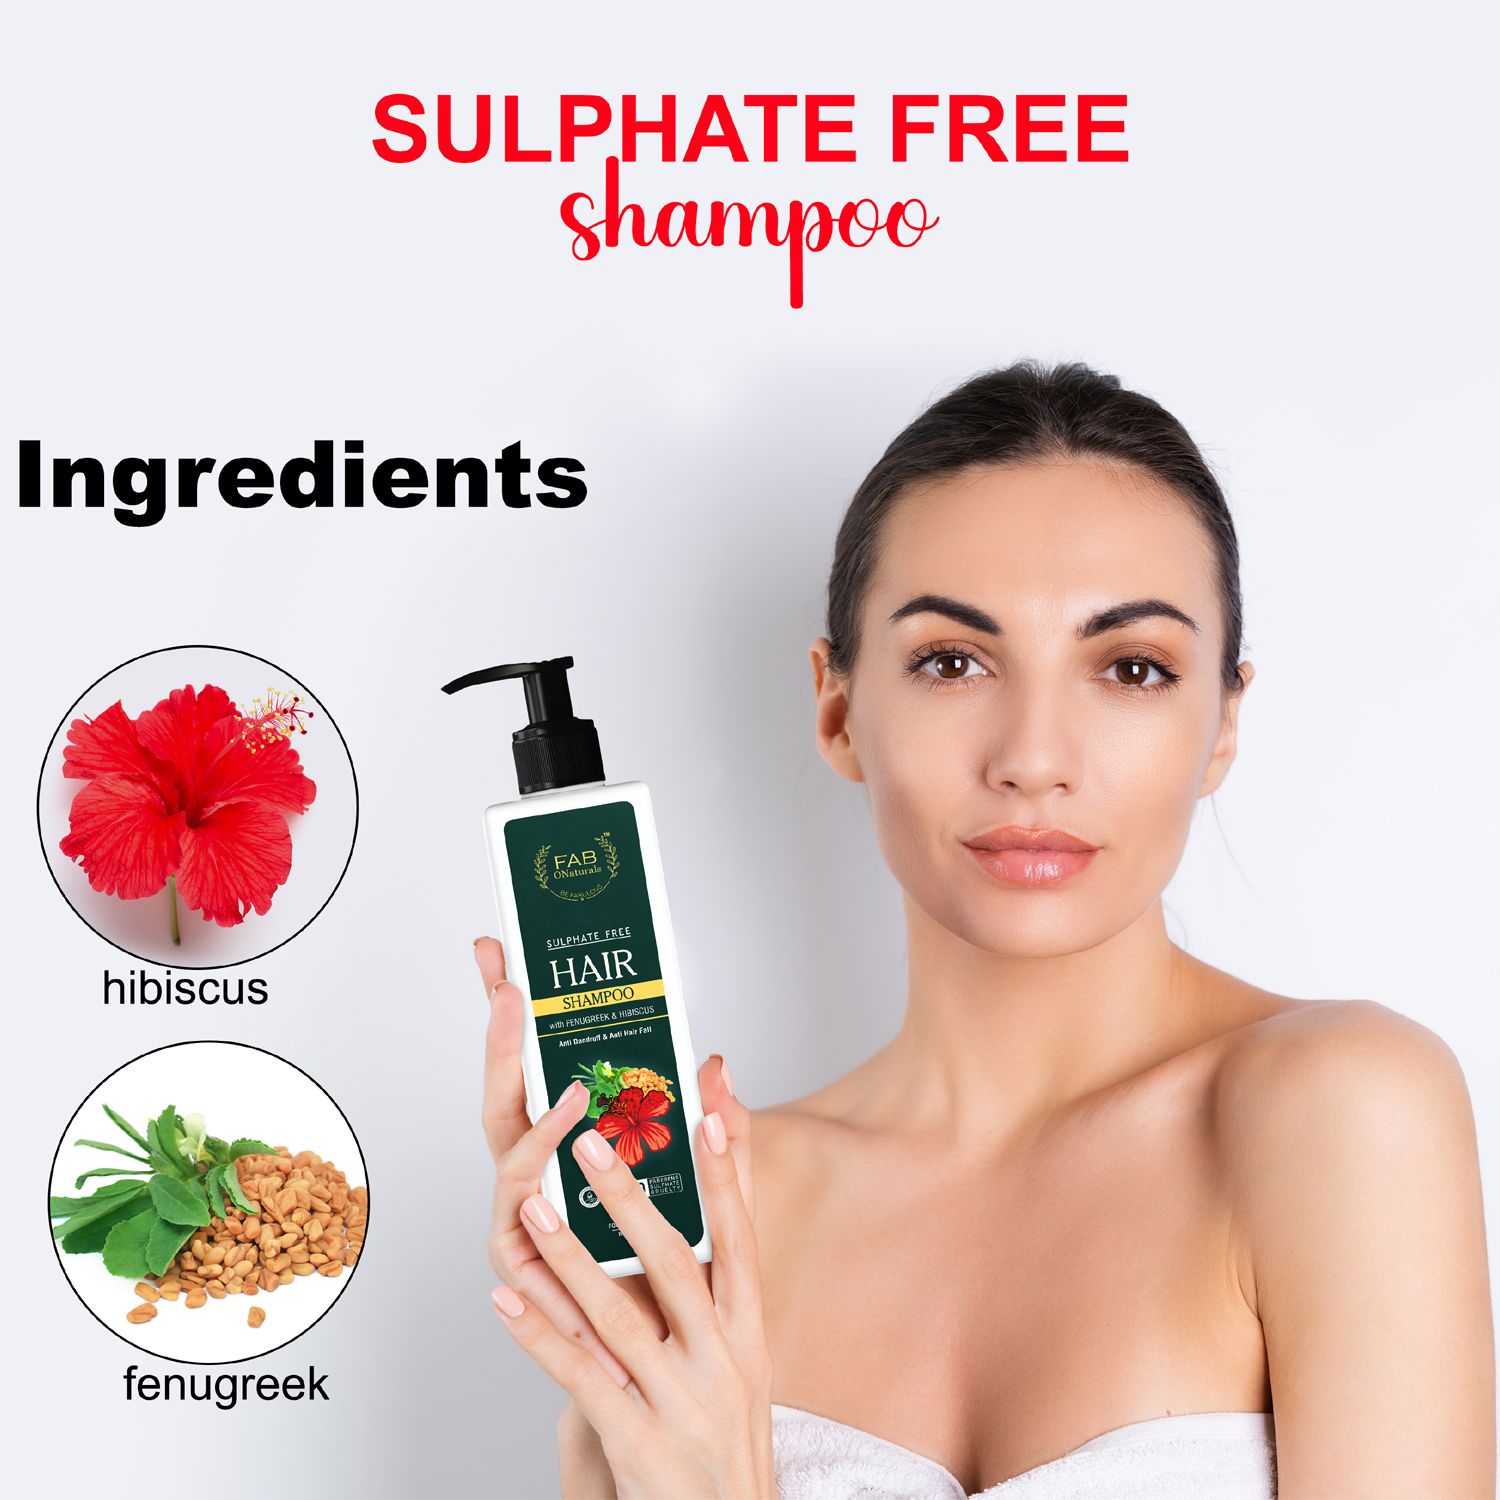 Fenugreek & Hibiscus Shampoo Natural Intense Repair & Sulphate free Shampoo for Frizzy and Dry Hair